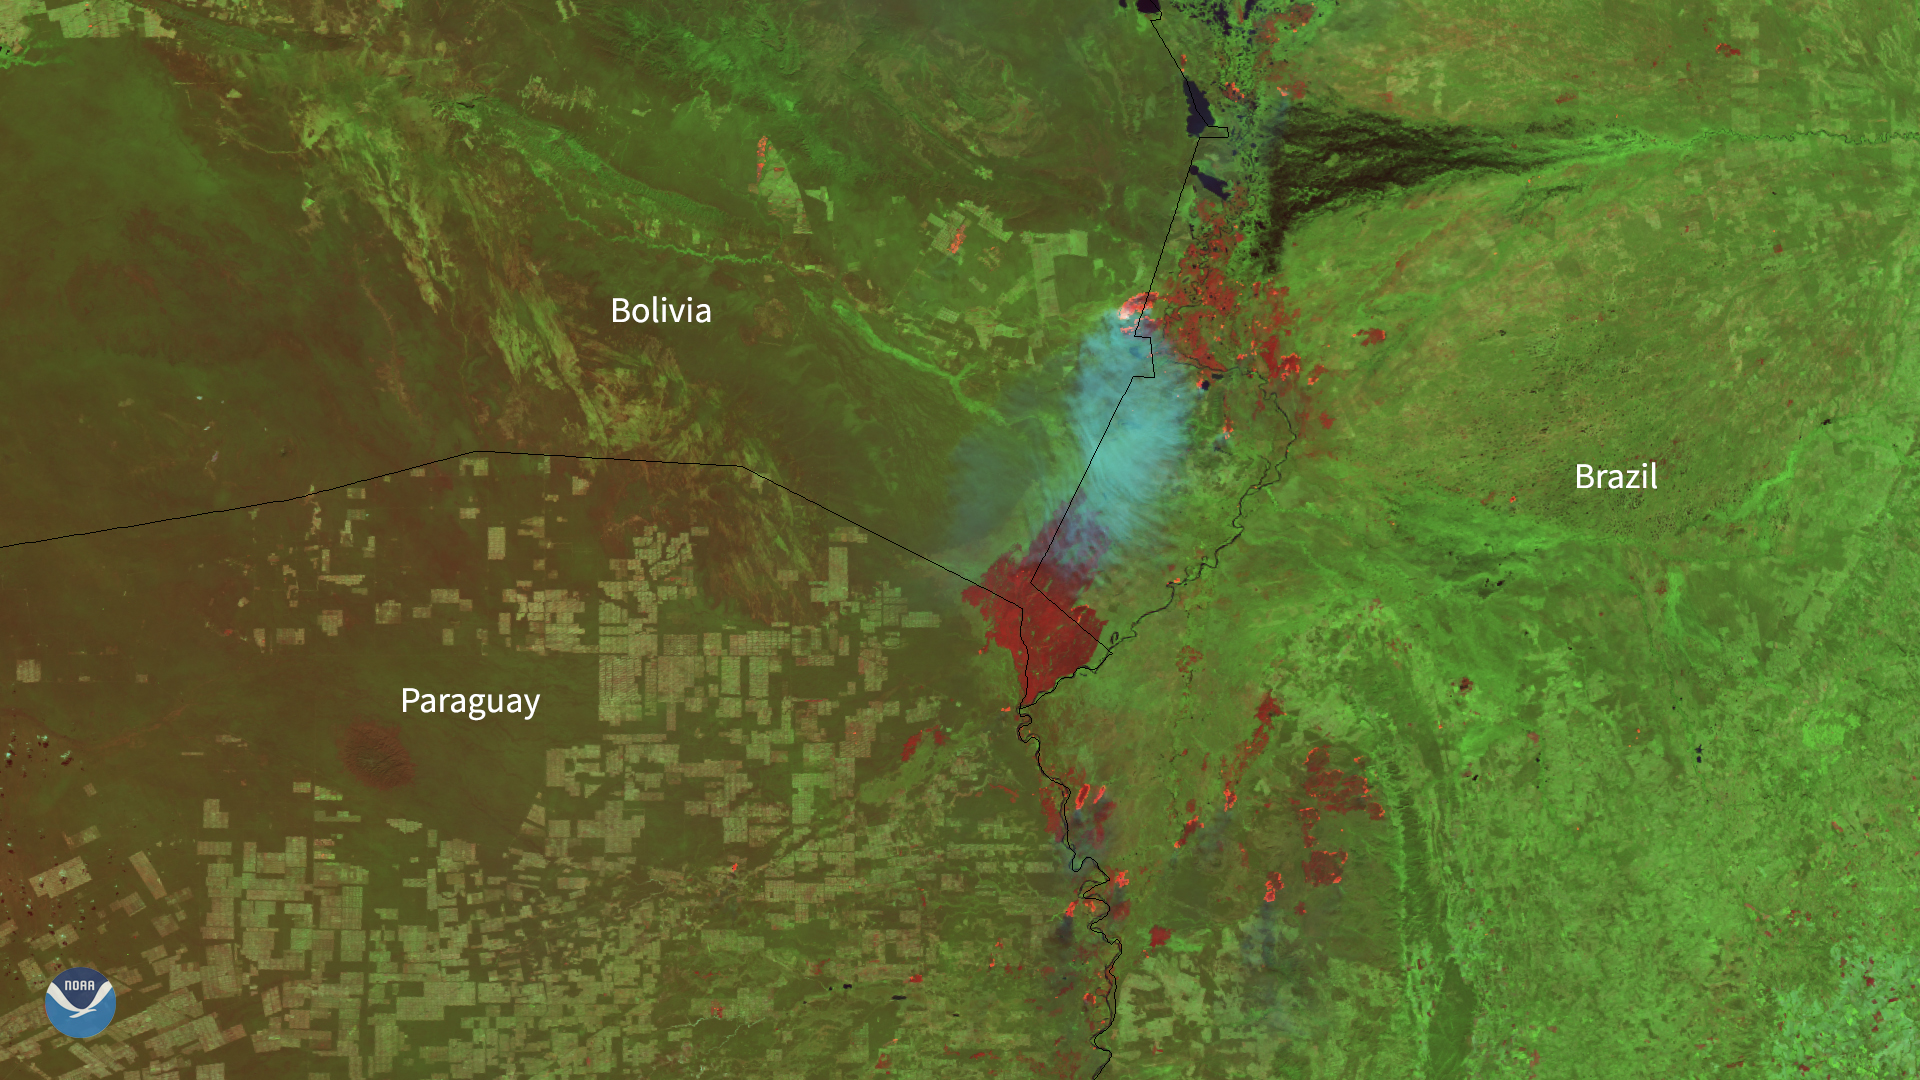 NOAA Satellites Focus On Smoke from Fires across South America